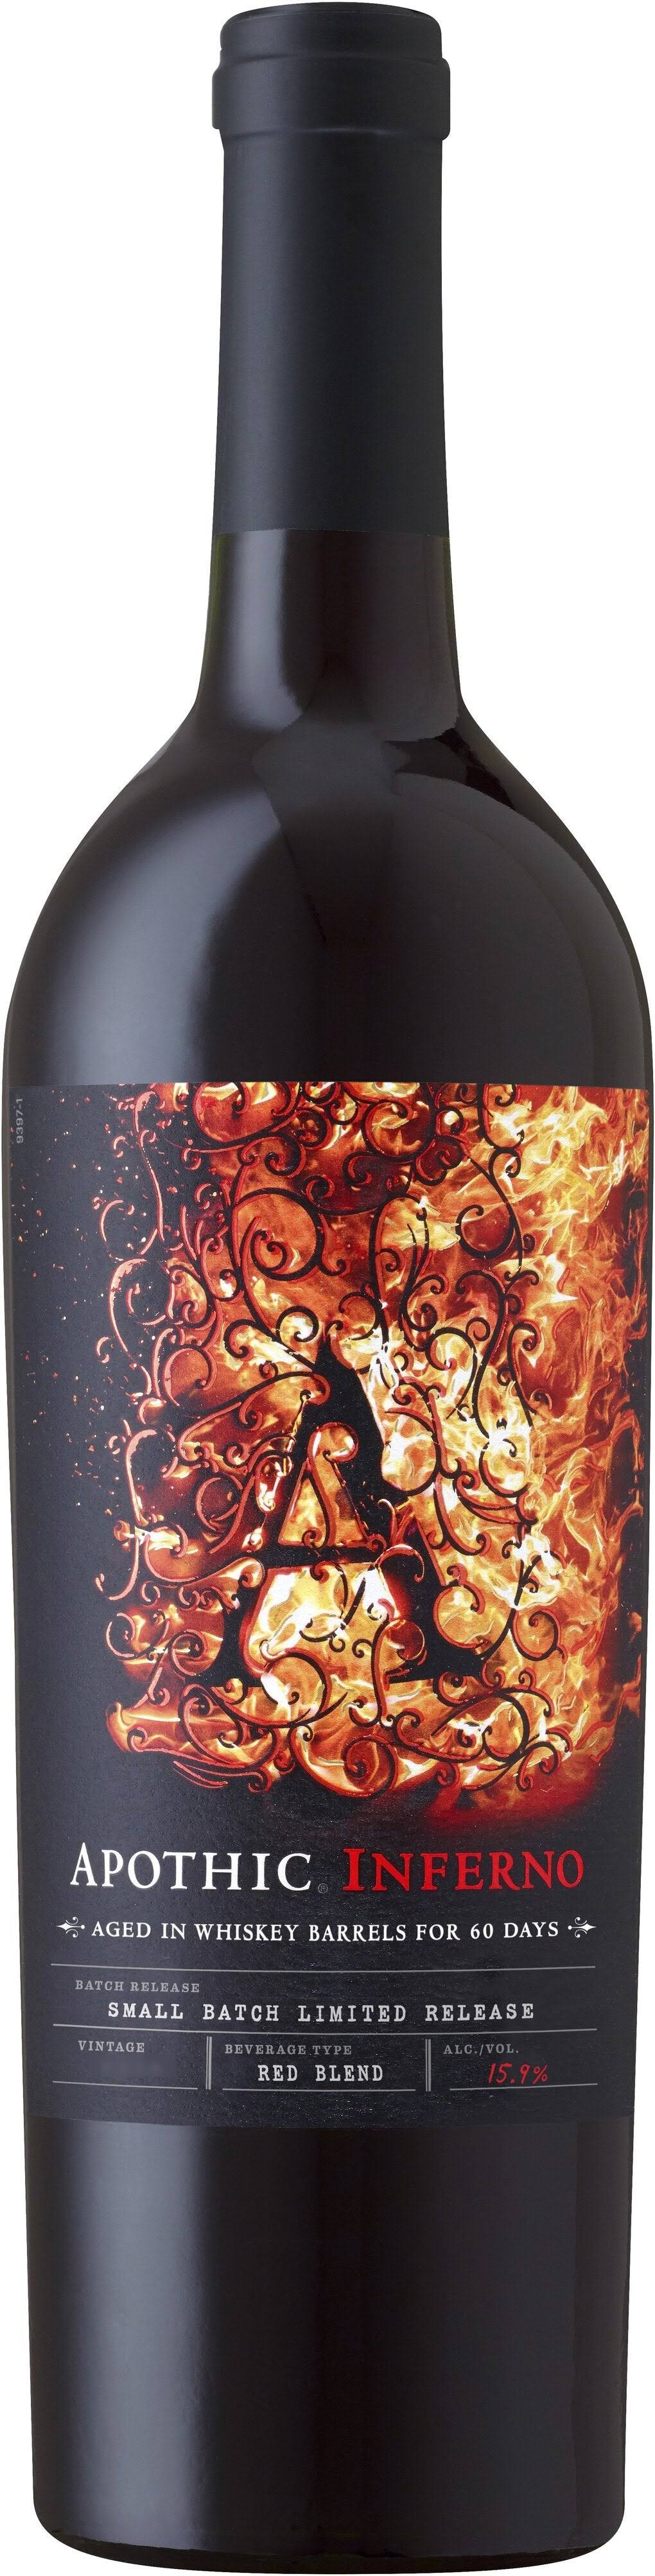 Apothic Red Blend, Inferno, California, 2014 - 750 ml